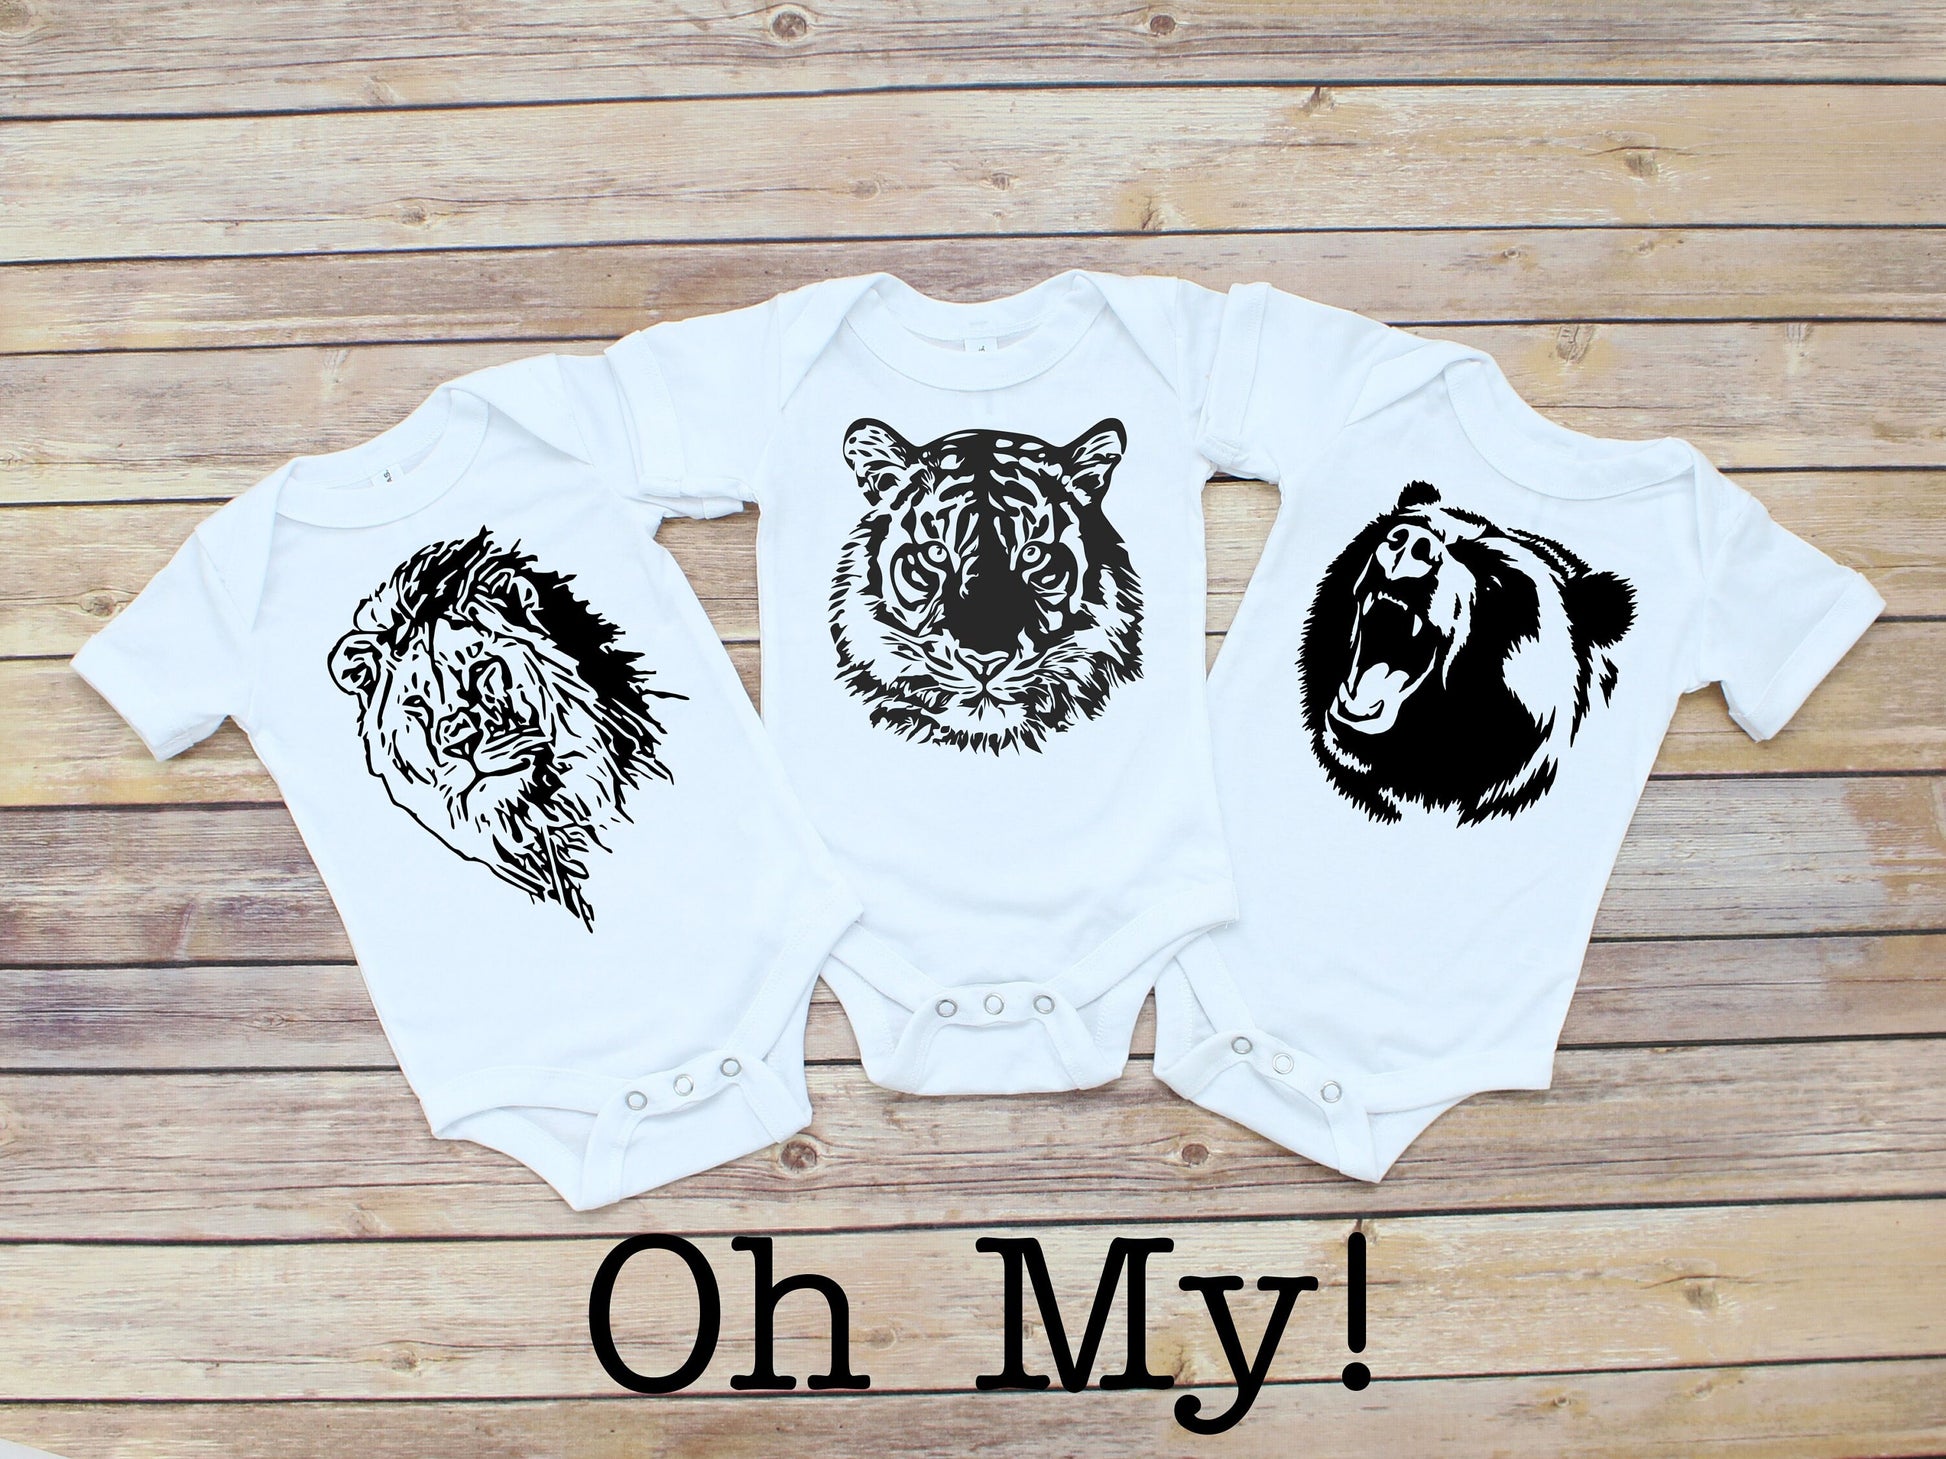 Lions and Tigers and Bears Oh My Infant Bodysuits or Shirts for Triplets - triplet gifts - triplet mama - triplet baby shower